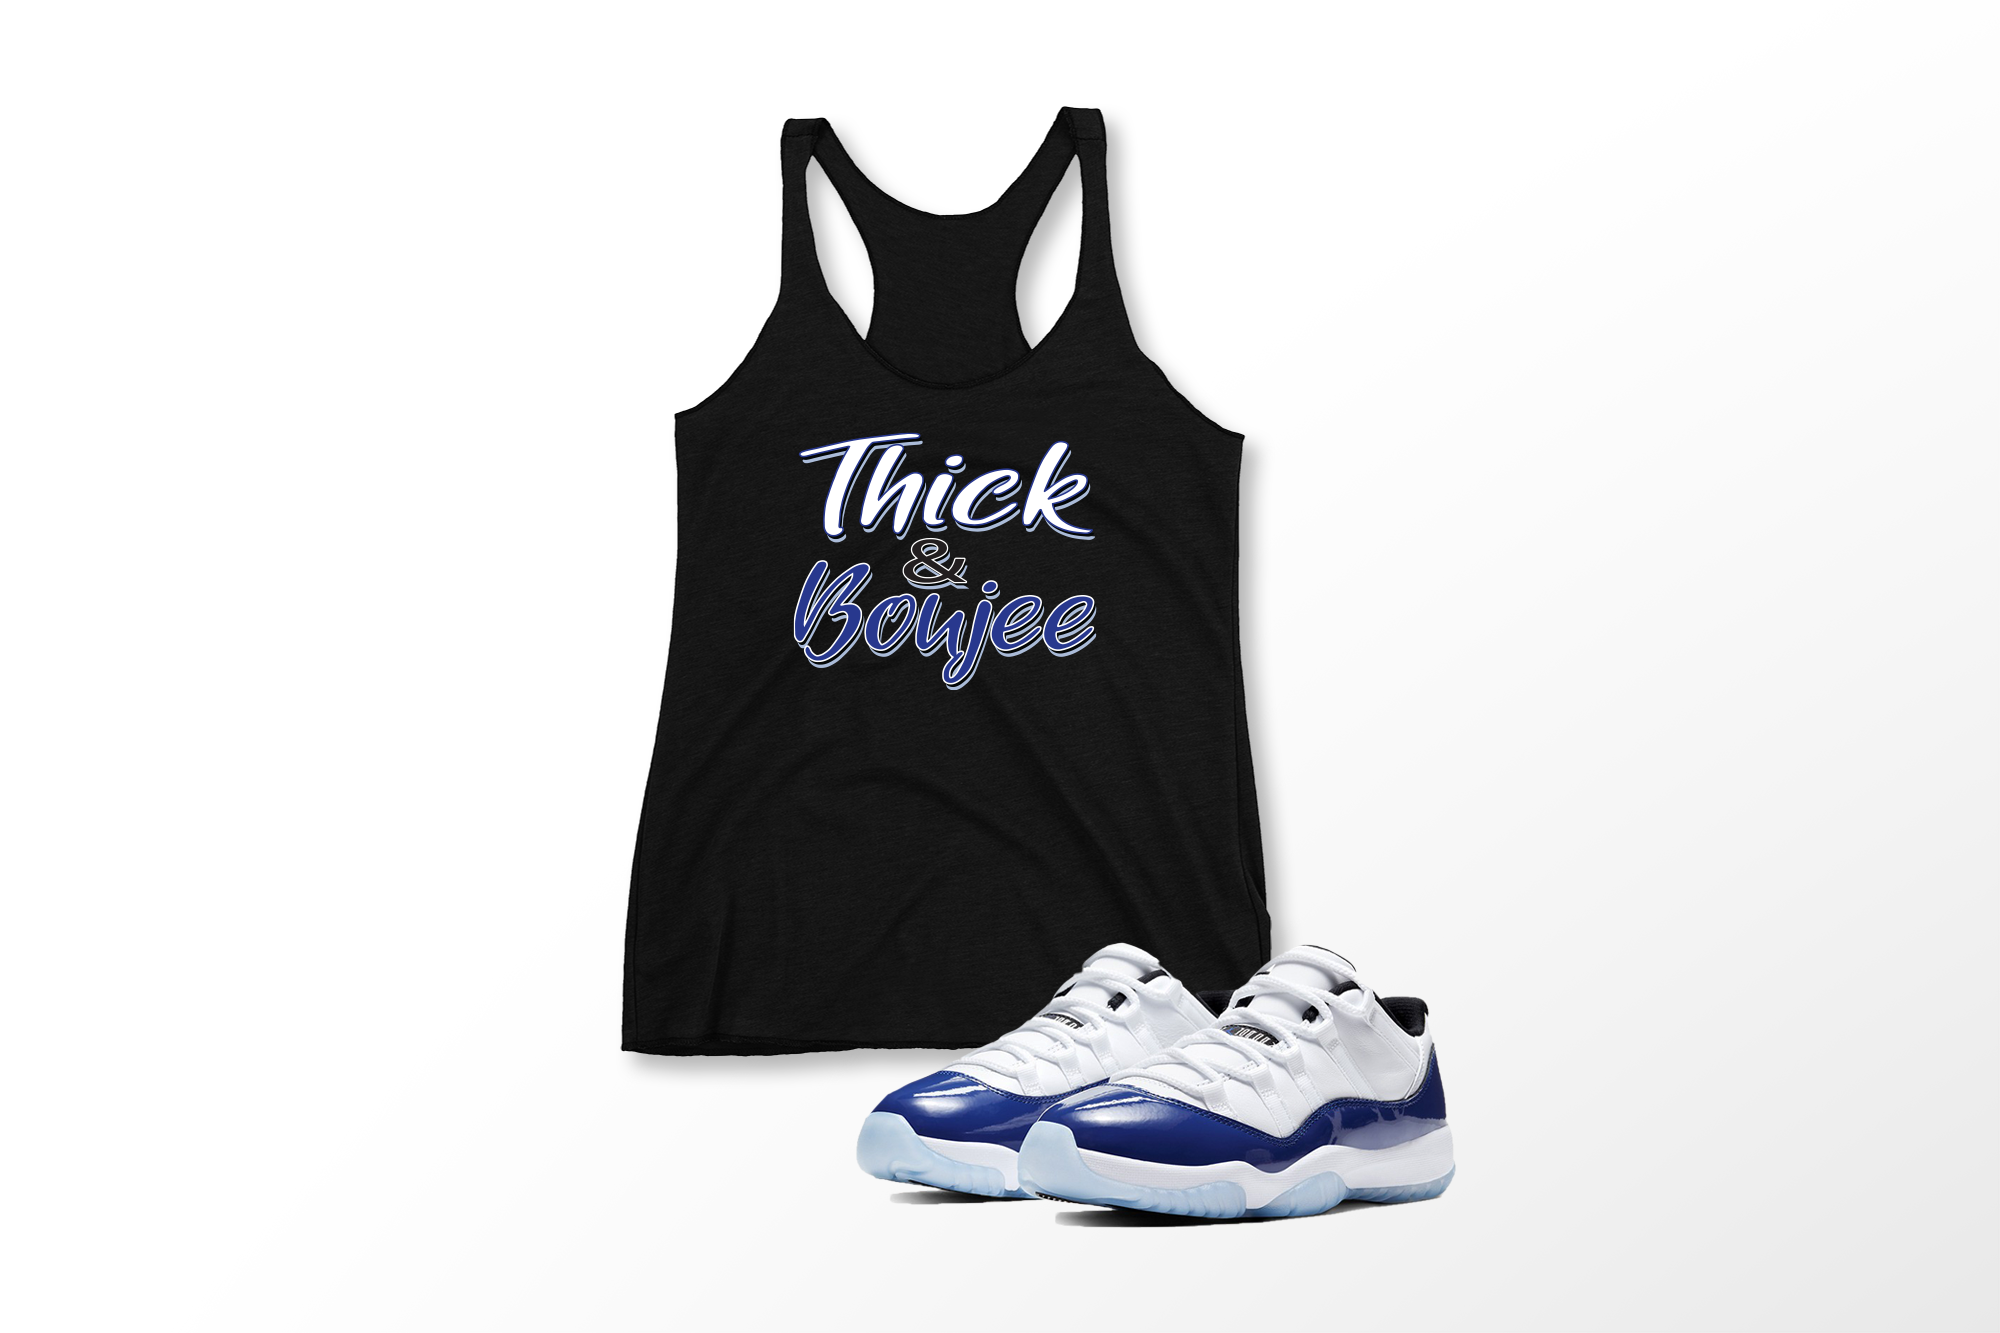 'Thick & Boujee' in Concord Sketch CW Women's Racerback Tank